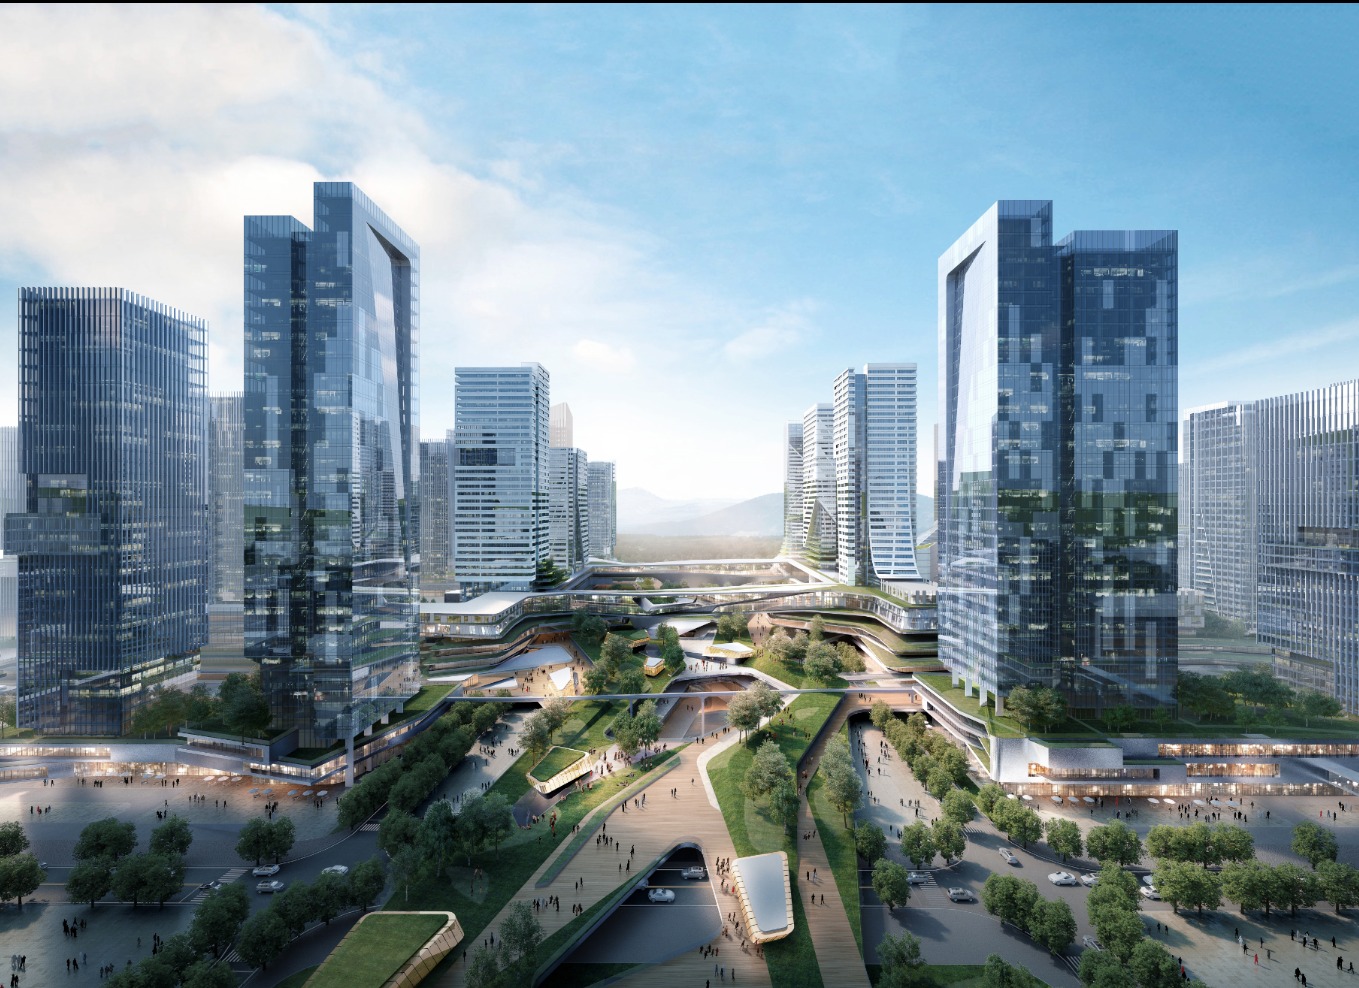 The exterior planning and design of the Hengqin Vientiane World International Commercial Complex